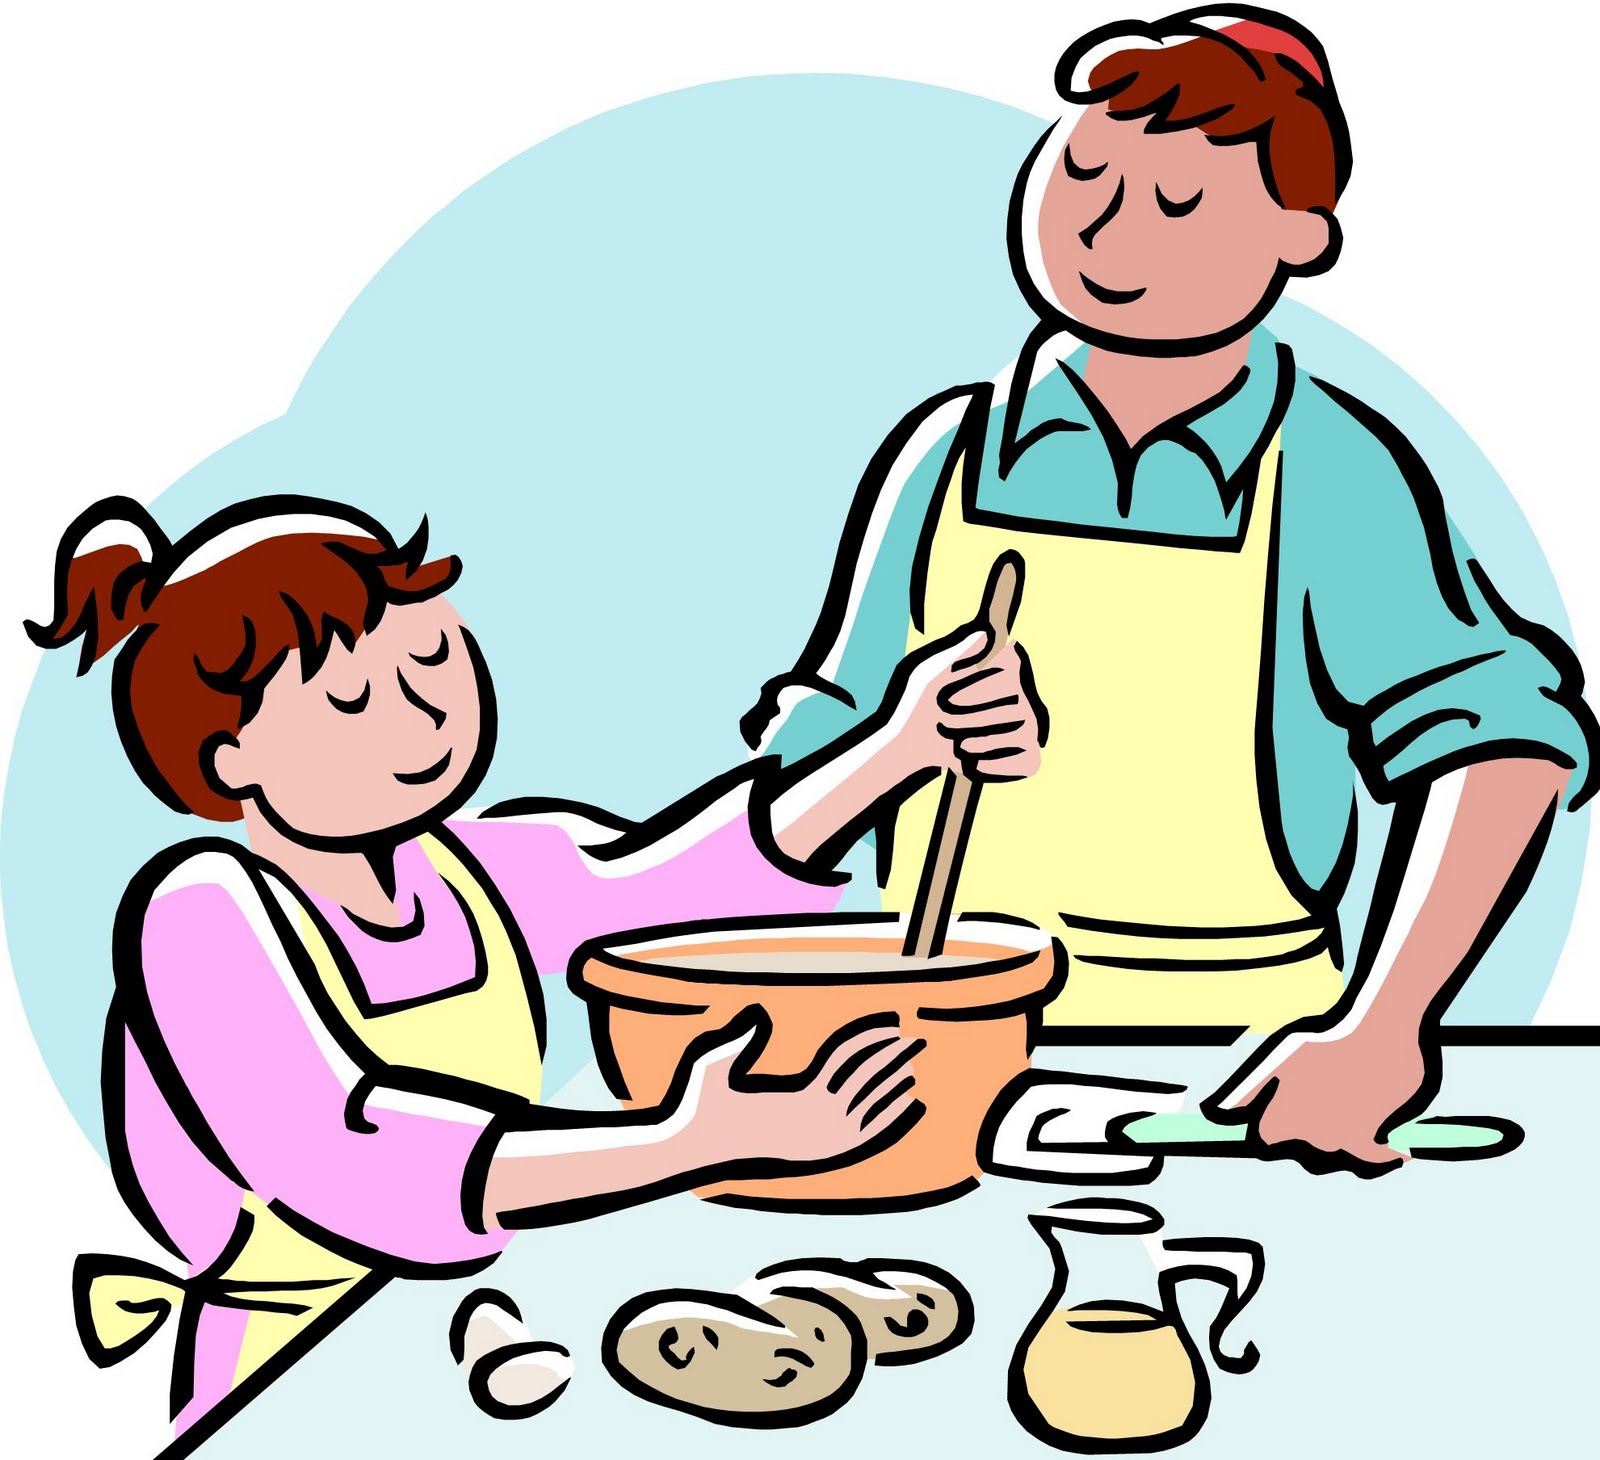 Cooking food clipart